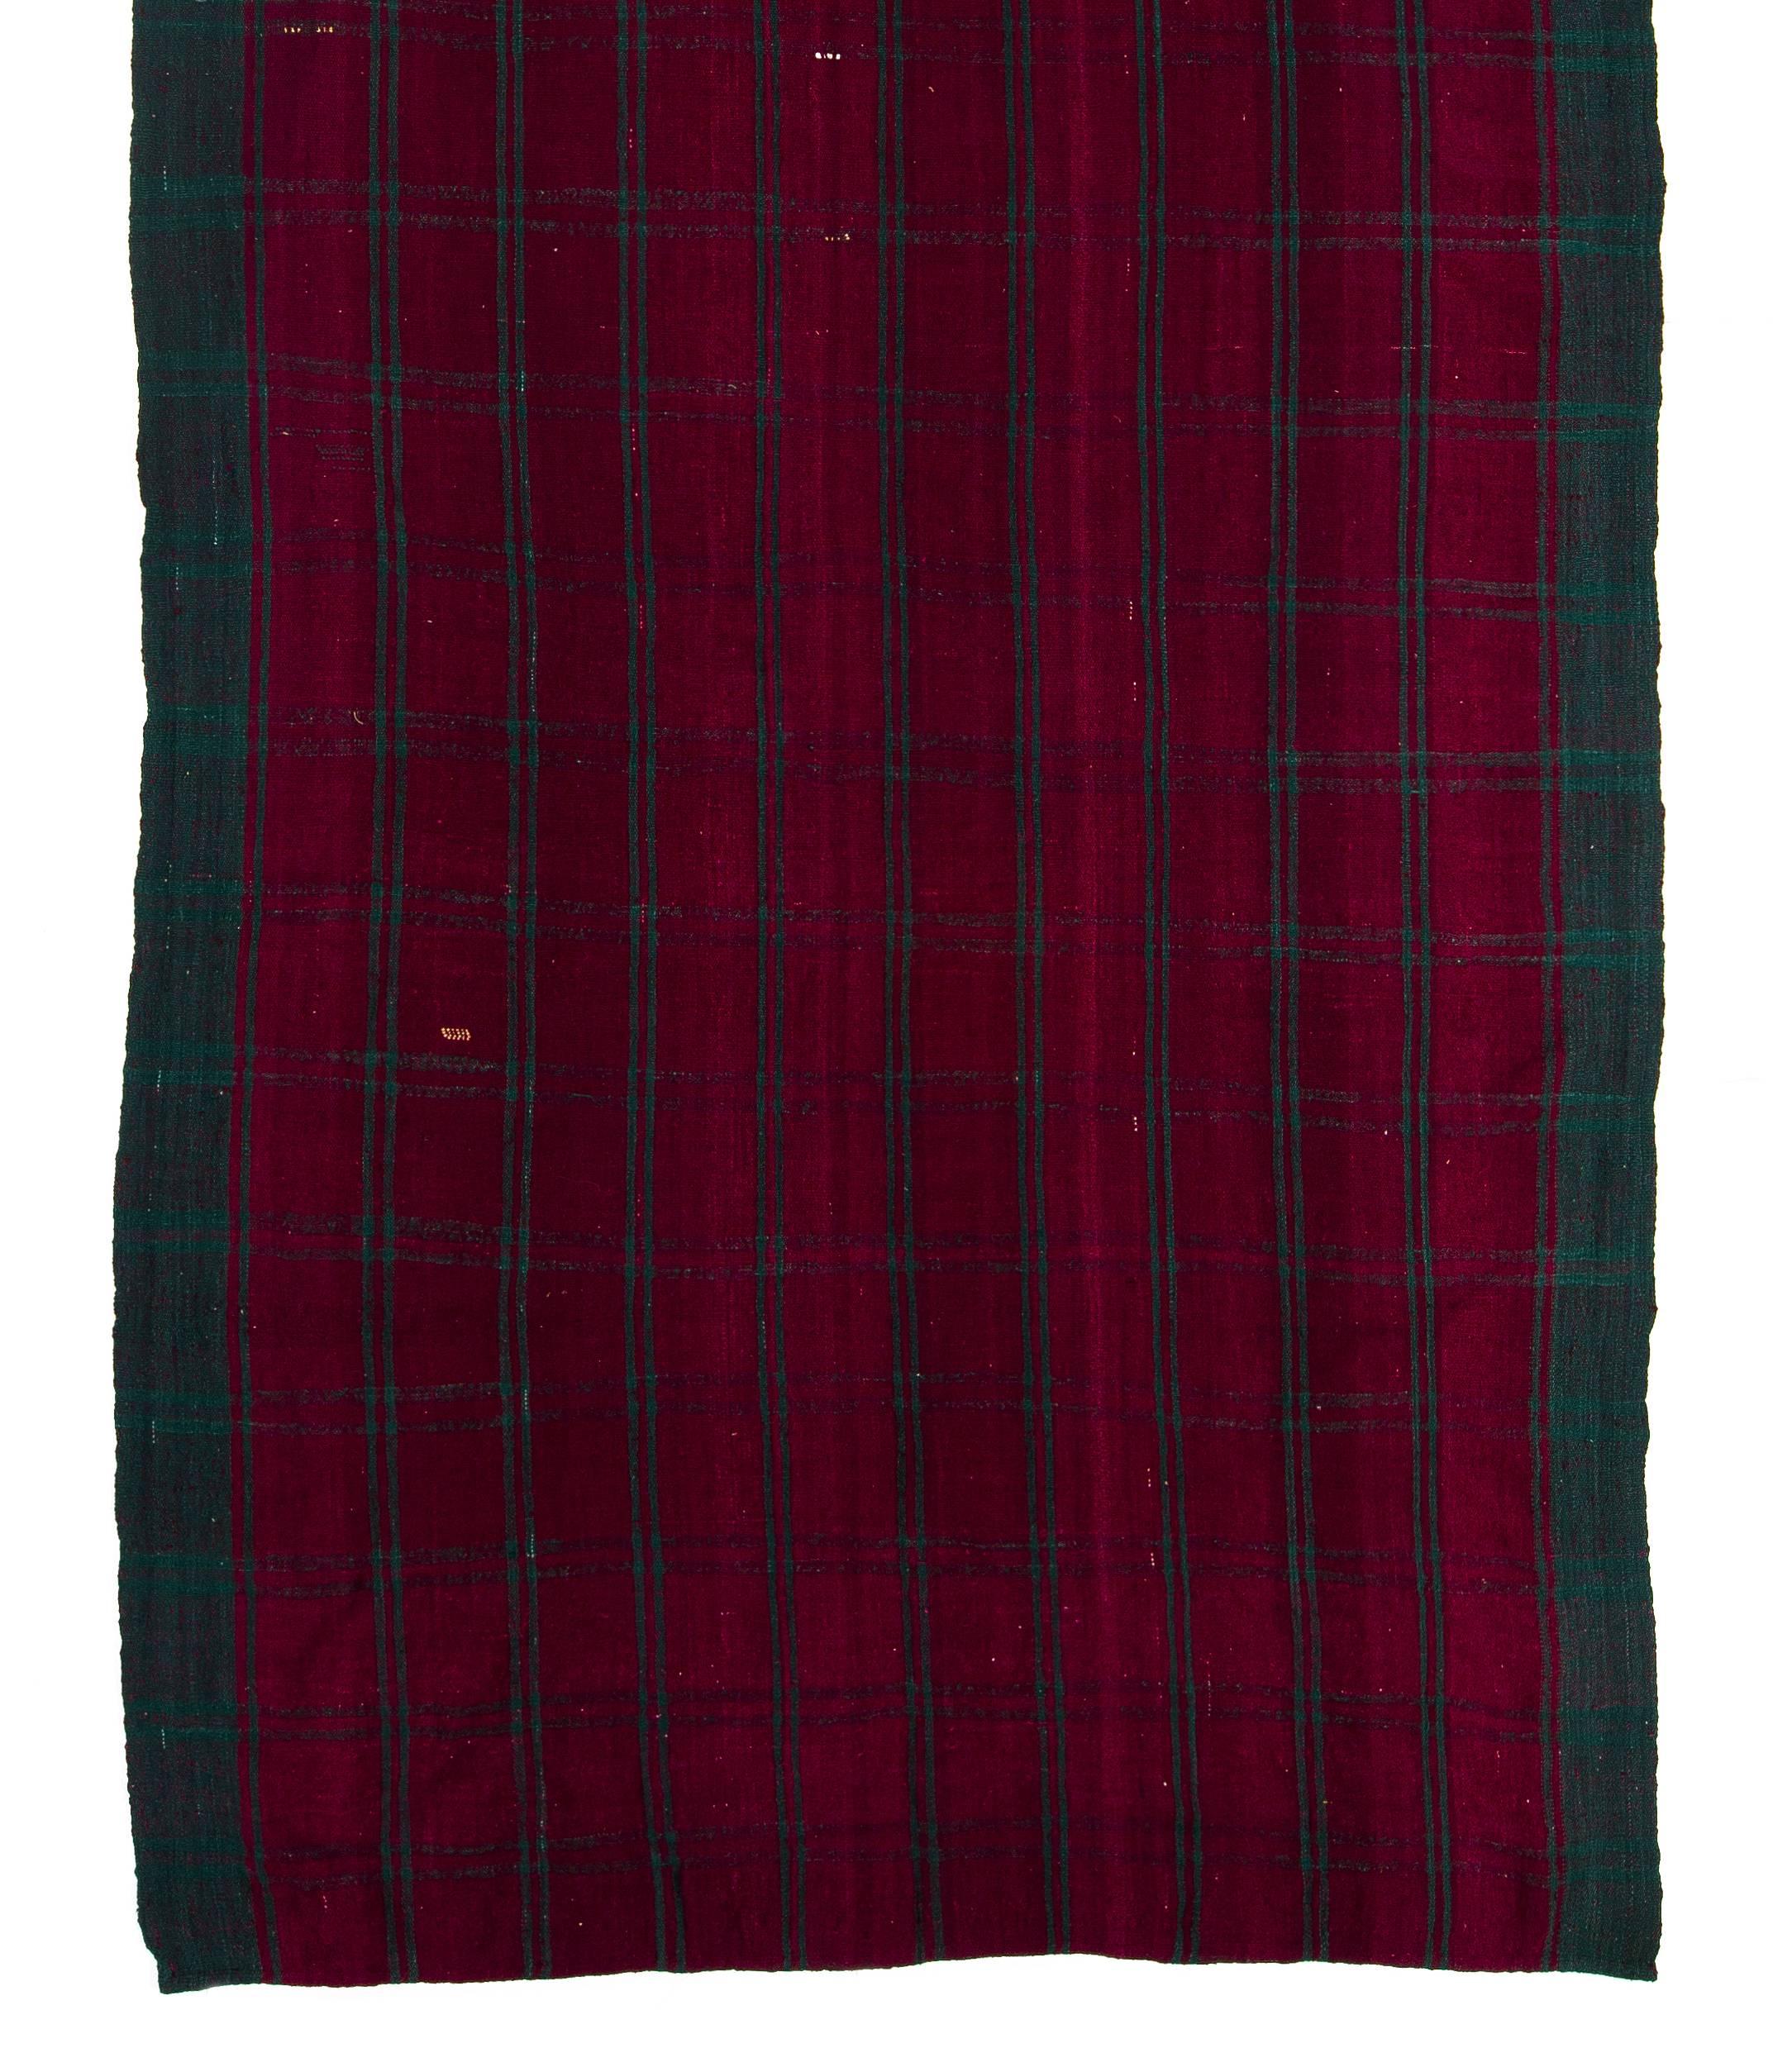 This beautiful and simple flat-woven rug is made of naturally dyed wool featuring a checkered design in dark ruby red and emerald green.
It was hand-woven by traditionally nomadic villagers of Central Turkey around mid-20th century. Lightweight,